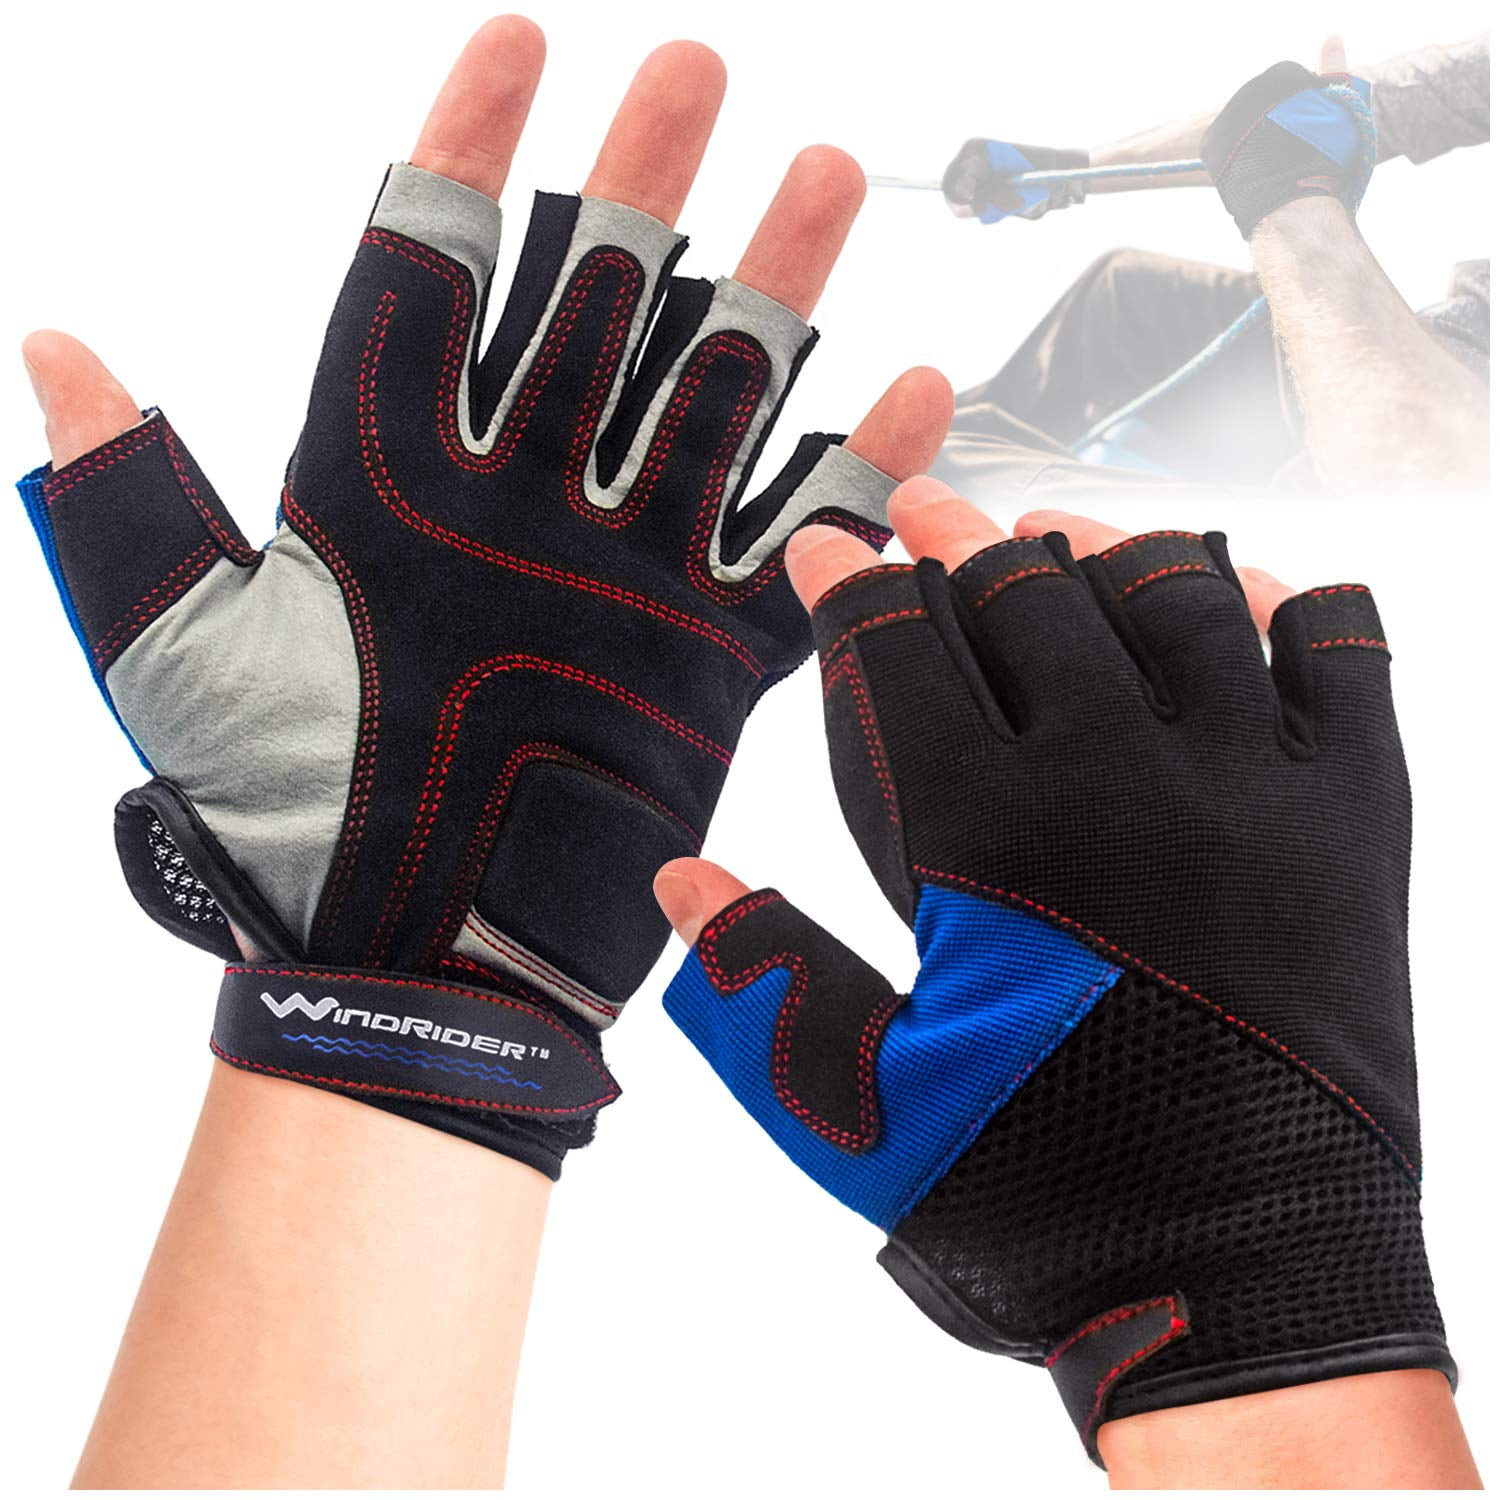 Strong Grip New Ammara sailing and outdoor sports gloves 